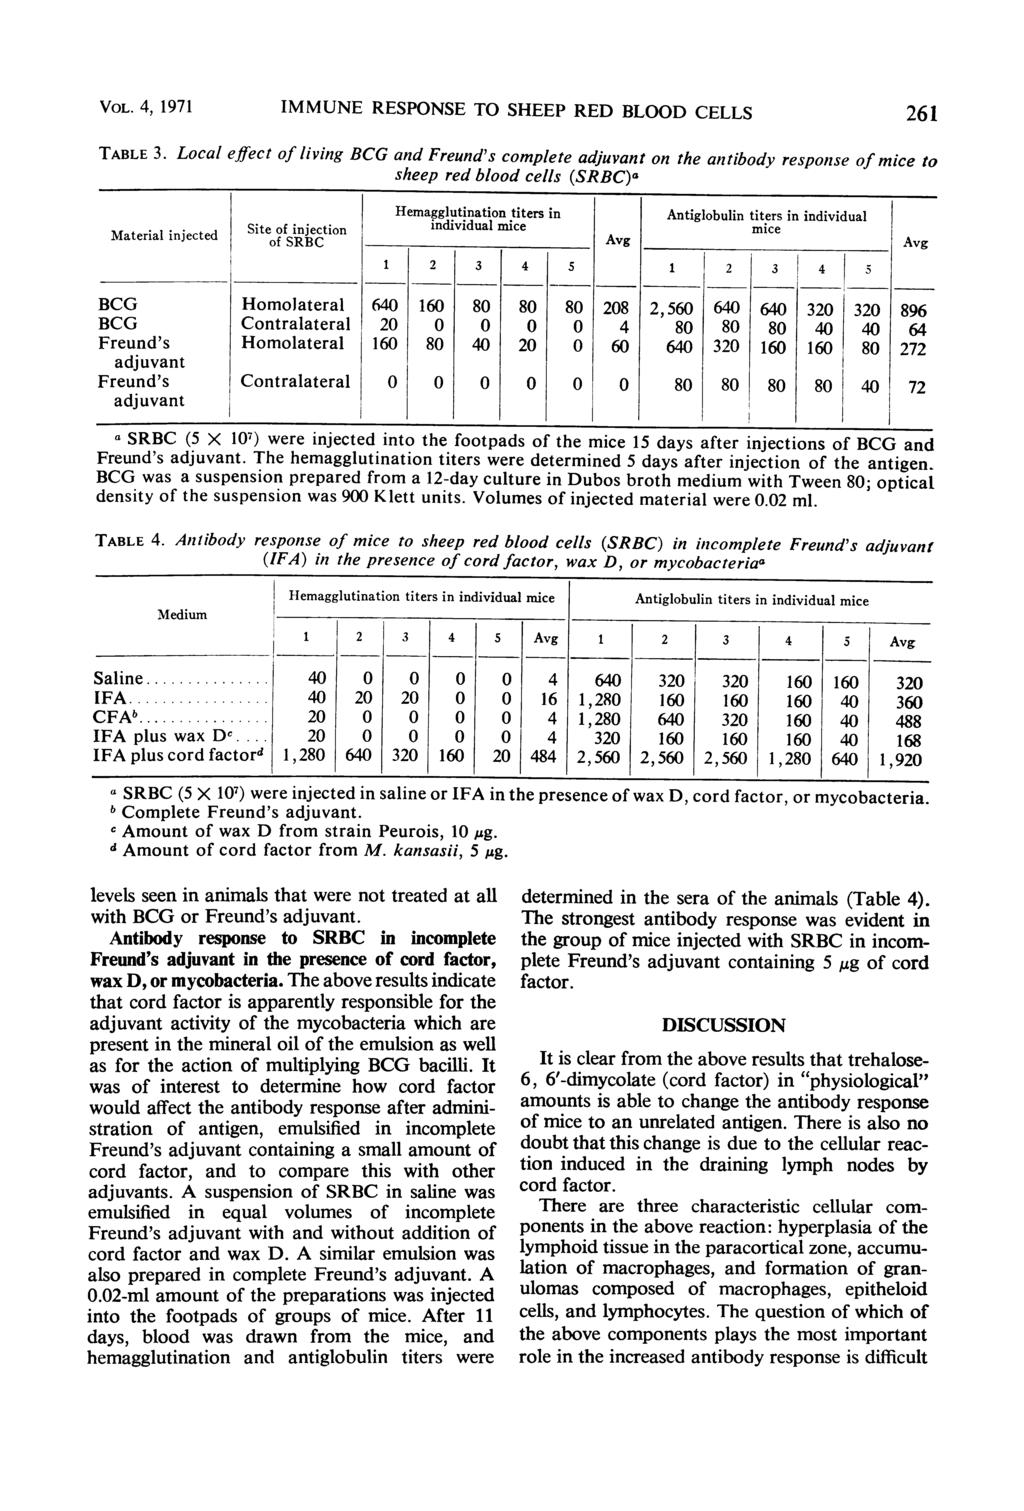 VOL. 4, 1971 MMUNE RESPONSE TO SHEEP RED BLOOD CELLS 261 TABLE 3.